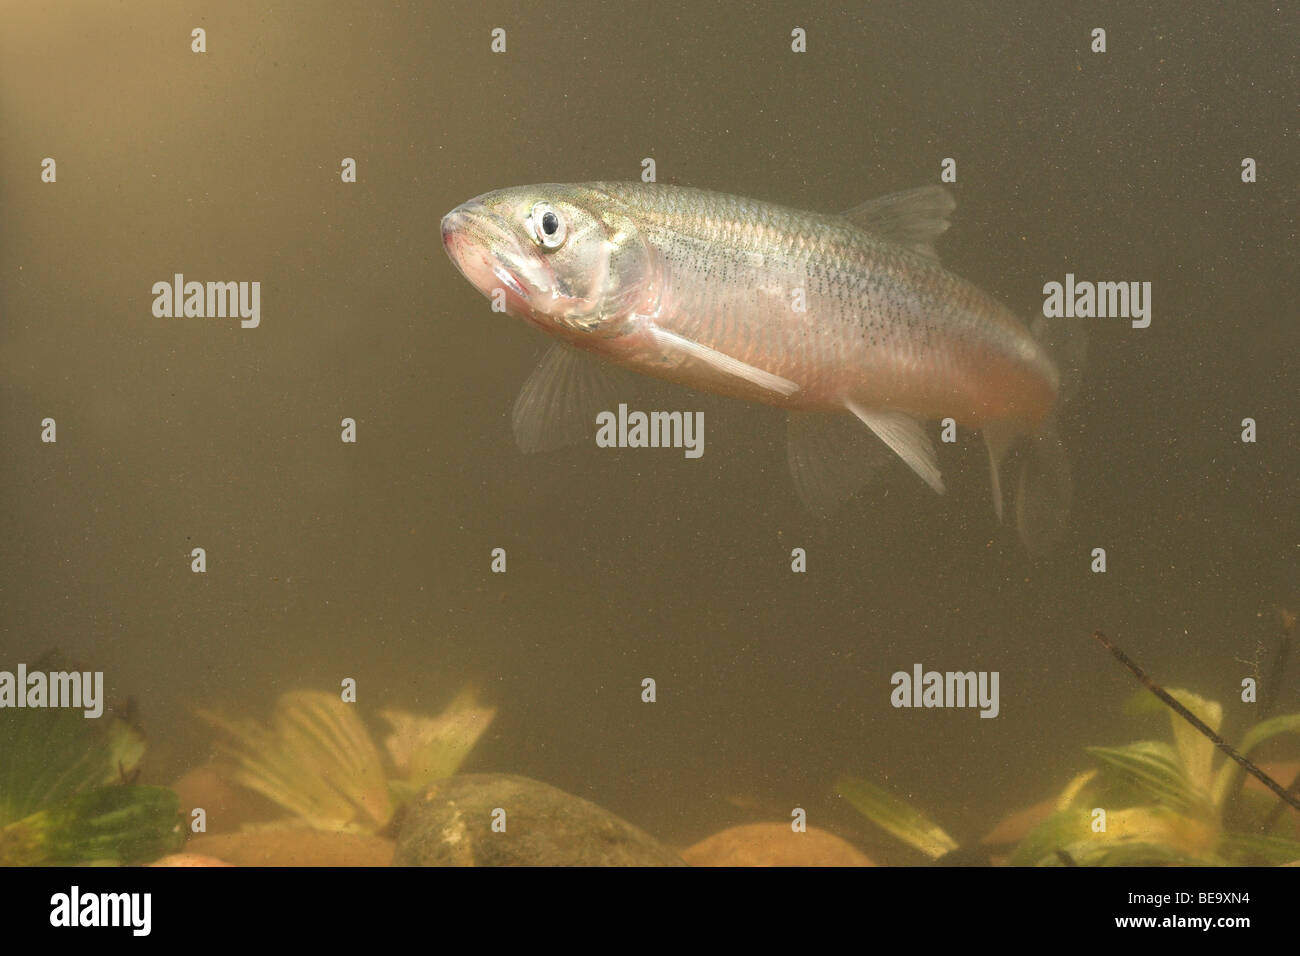 photo of an anadromous European smelt swimming above a bottom of rocks and some plants Stock Photo